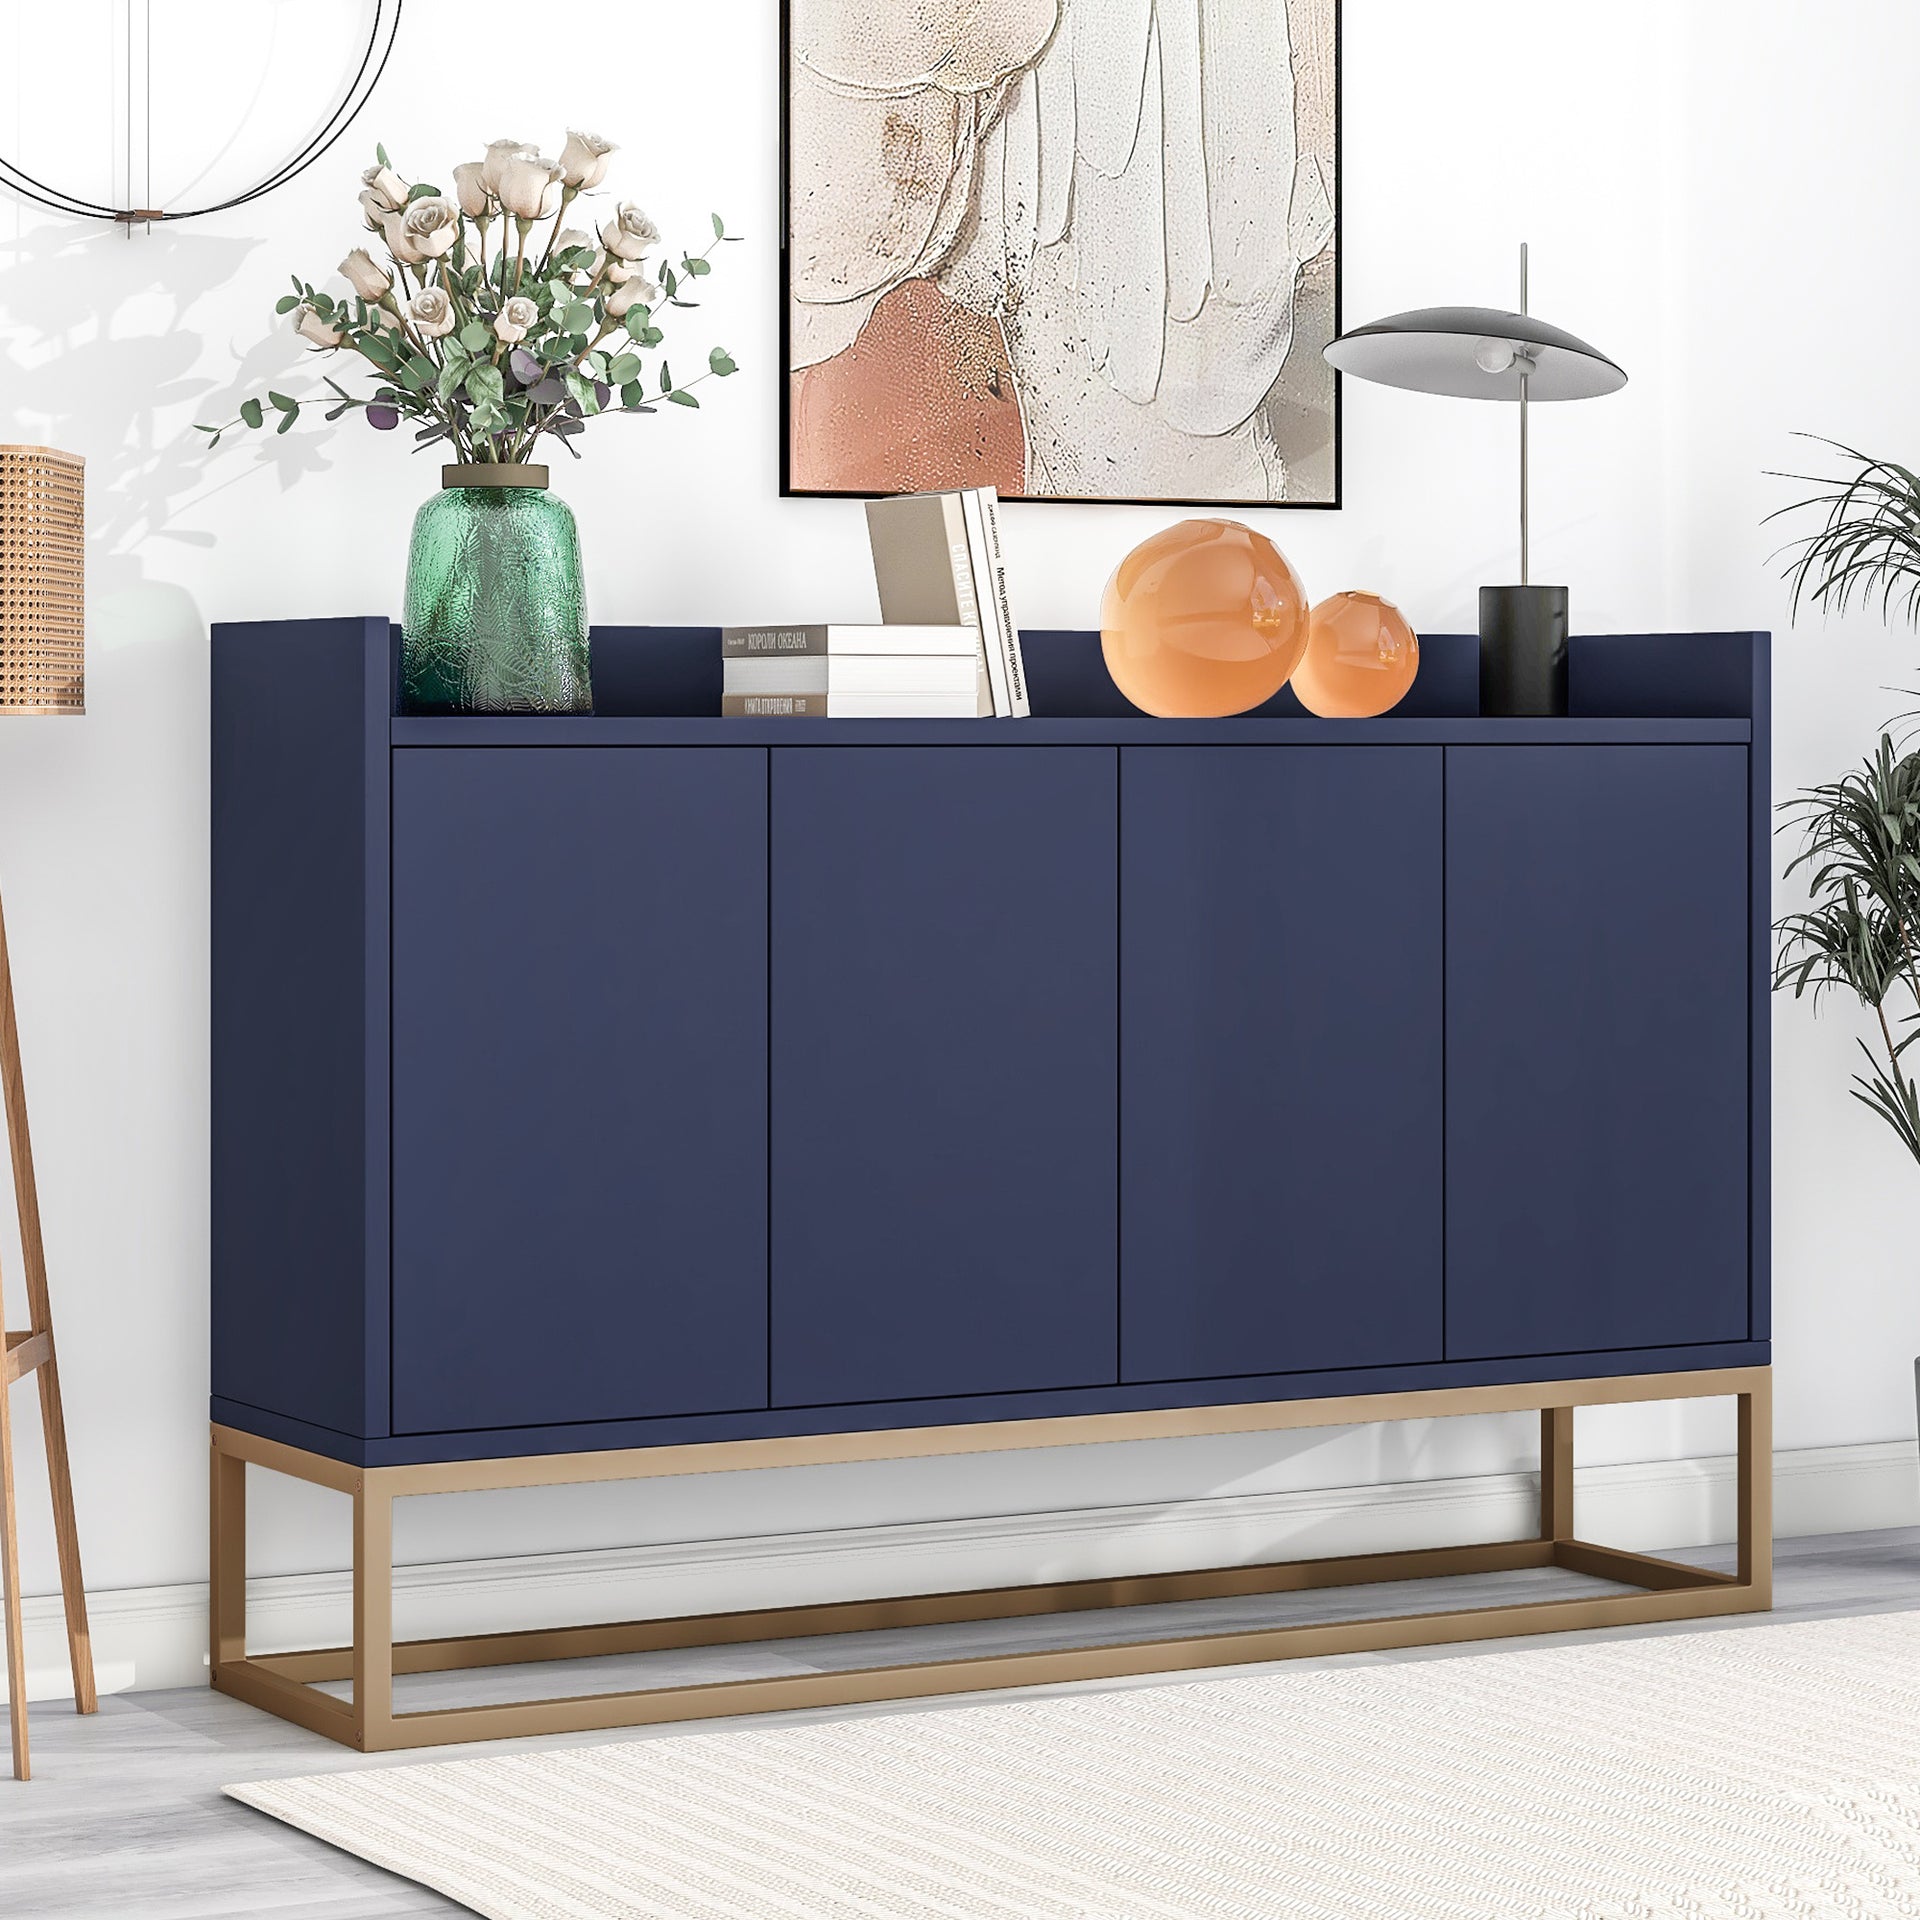 TREXM Modern Sideboard Elegant Buffet Cabinet with Large Storage Space (Navy)